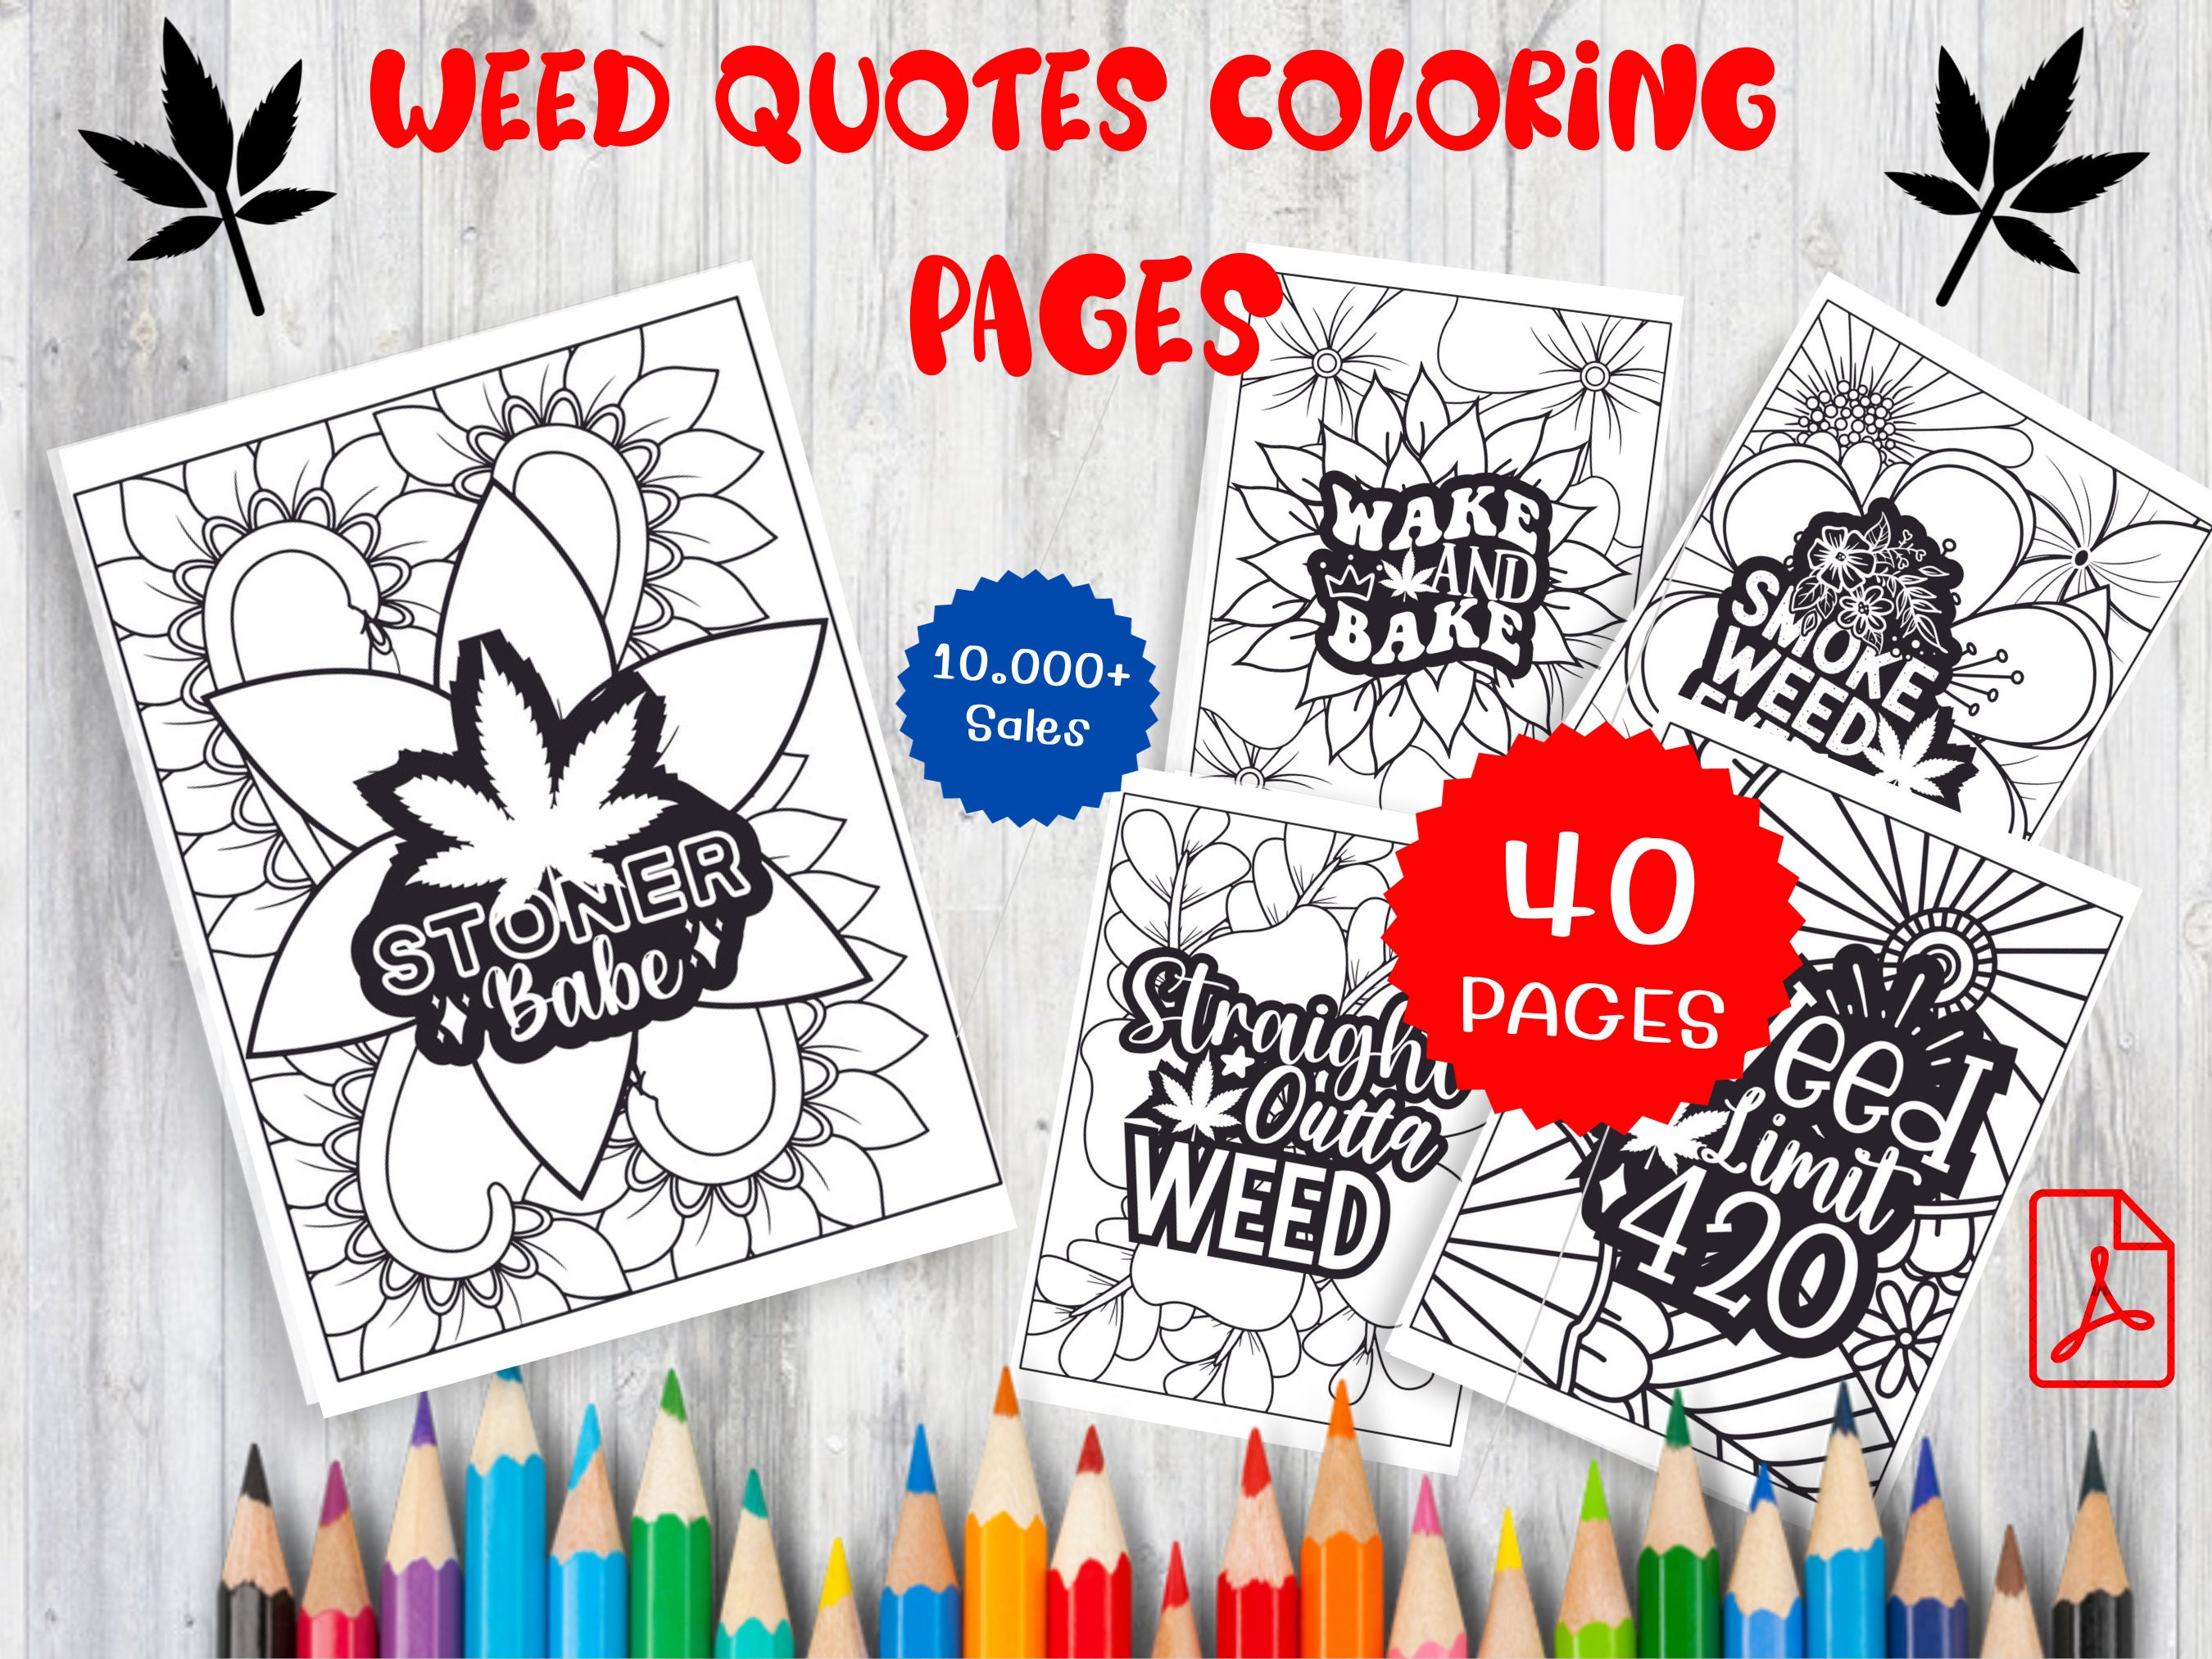 Cartoon Stoner Coloring Book: High Coloring Books for Adults, Cartoon Weed  Coloring Book, Trippy Coloring Book for Adults, Anxiety Relief Coloring Boo